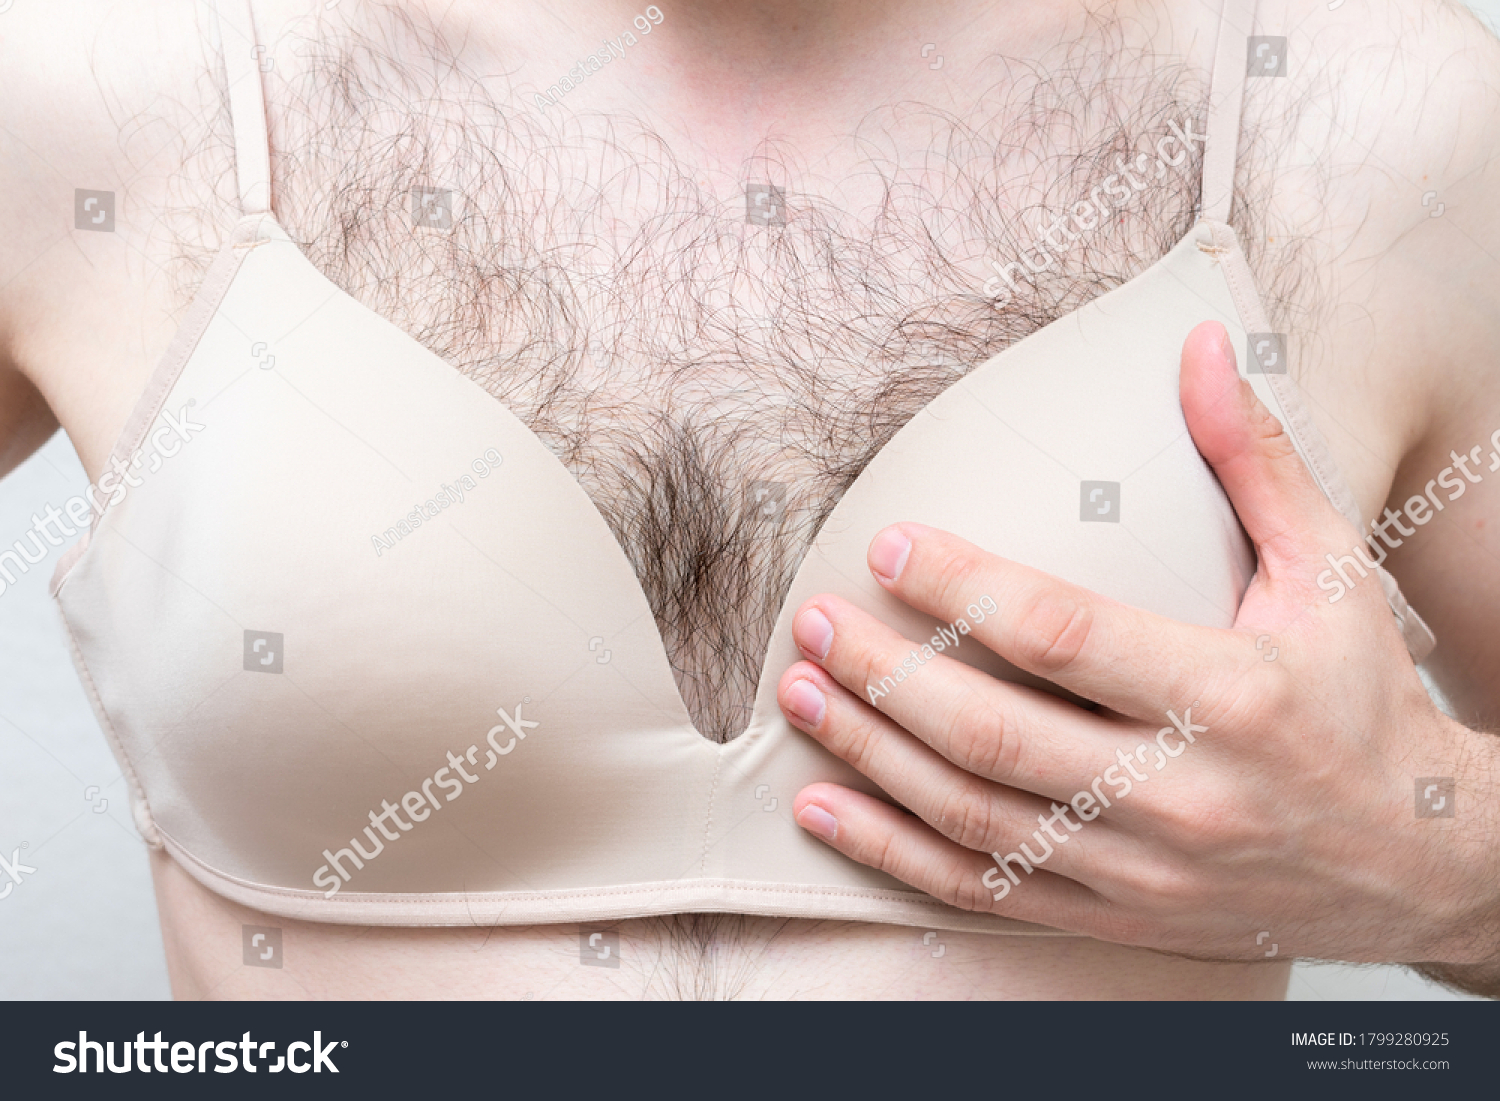 birhan chane recommends big breasted hairy women pic